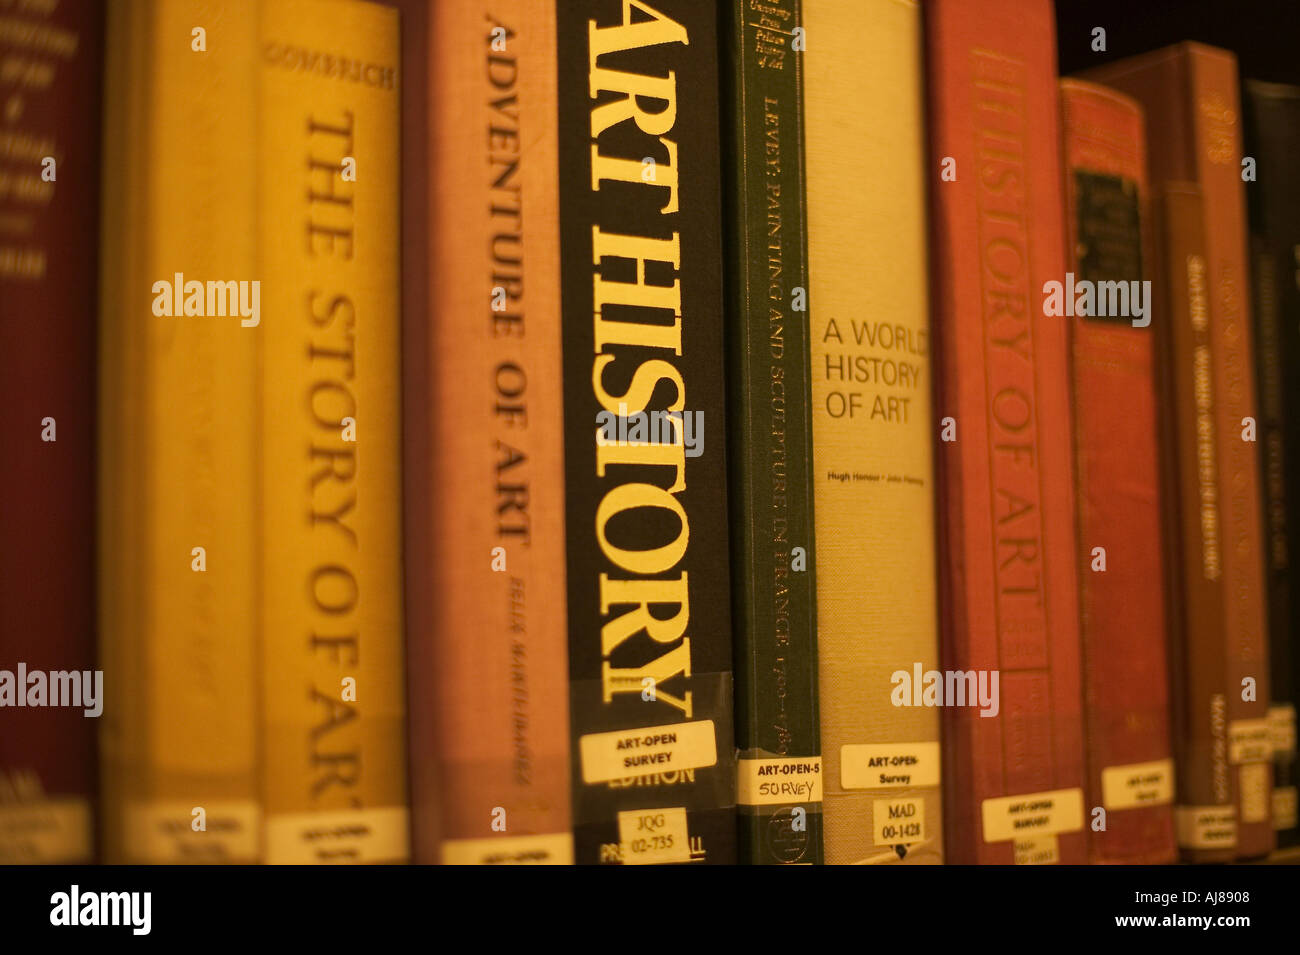 Art History books on shelves in the reference reading room at the New York Public Library in Midtown Manhattan New York NY Stock Photo